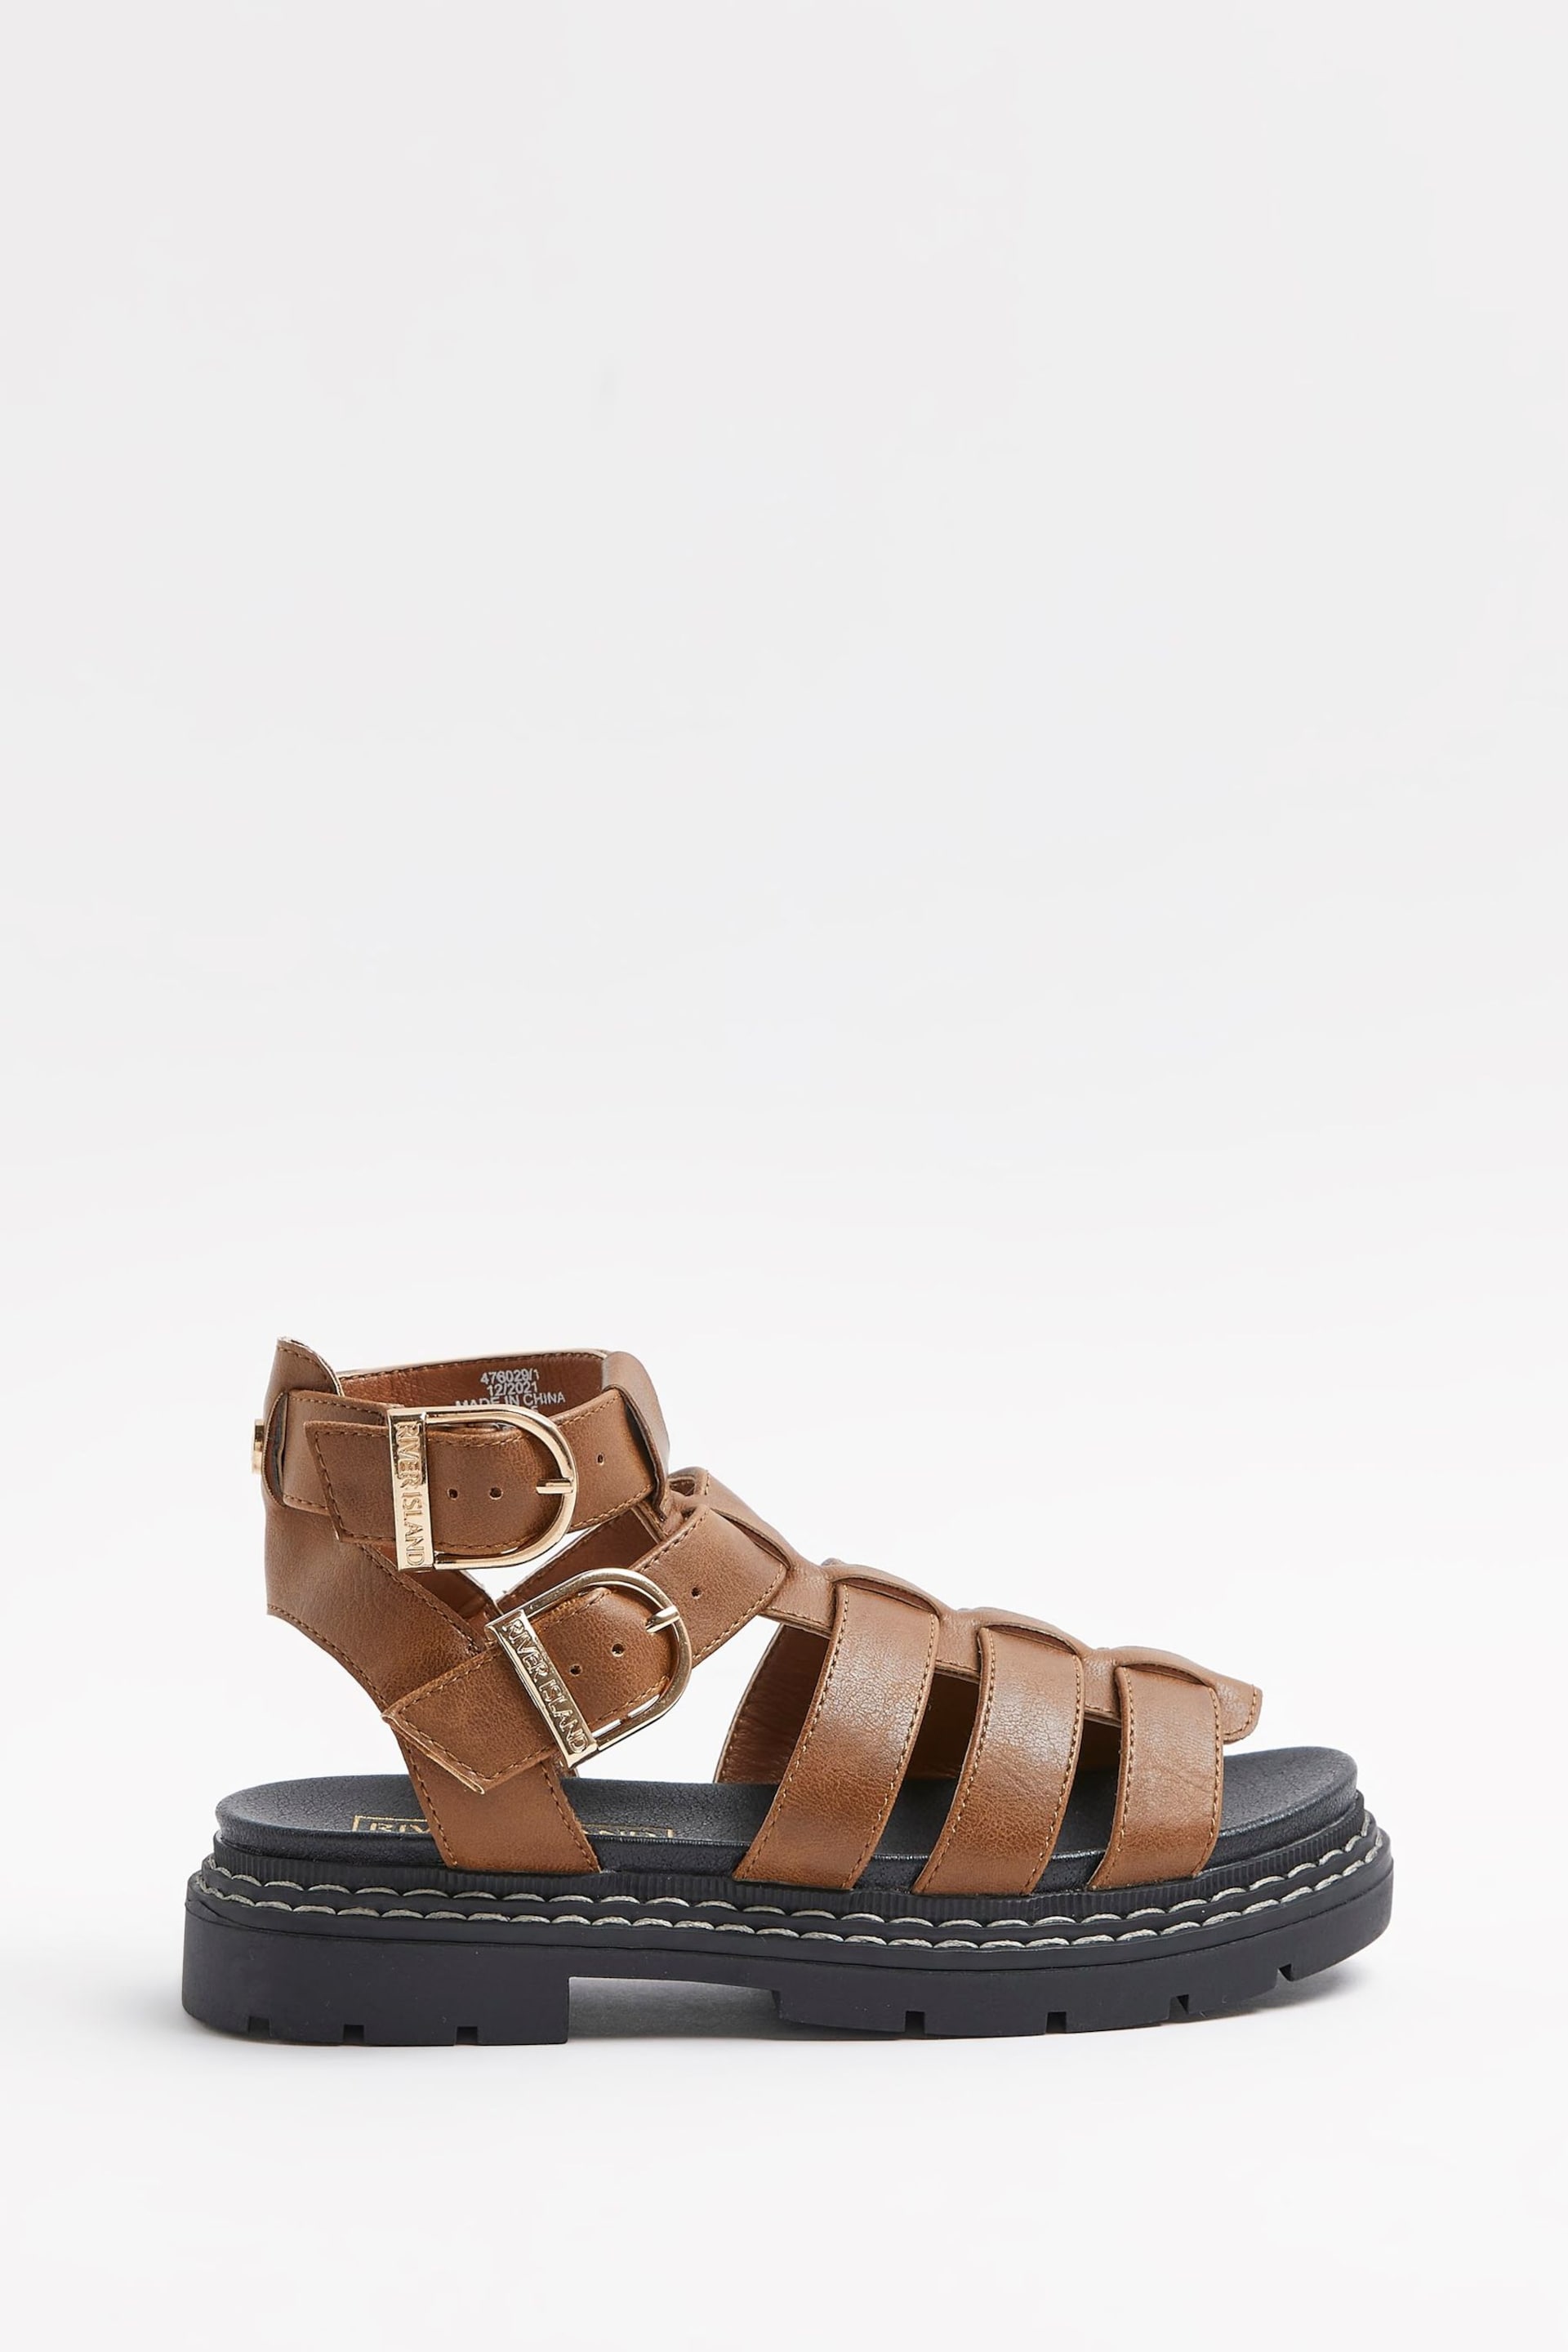 River Island Girls Brown Gladiator Cleated Sandals - Image 1 of 4